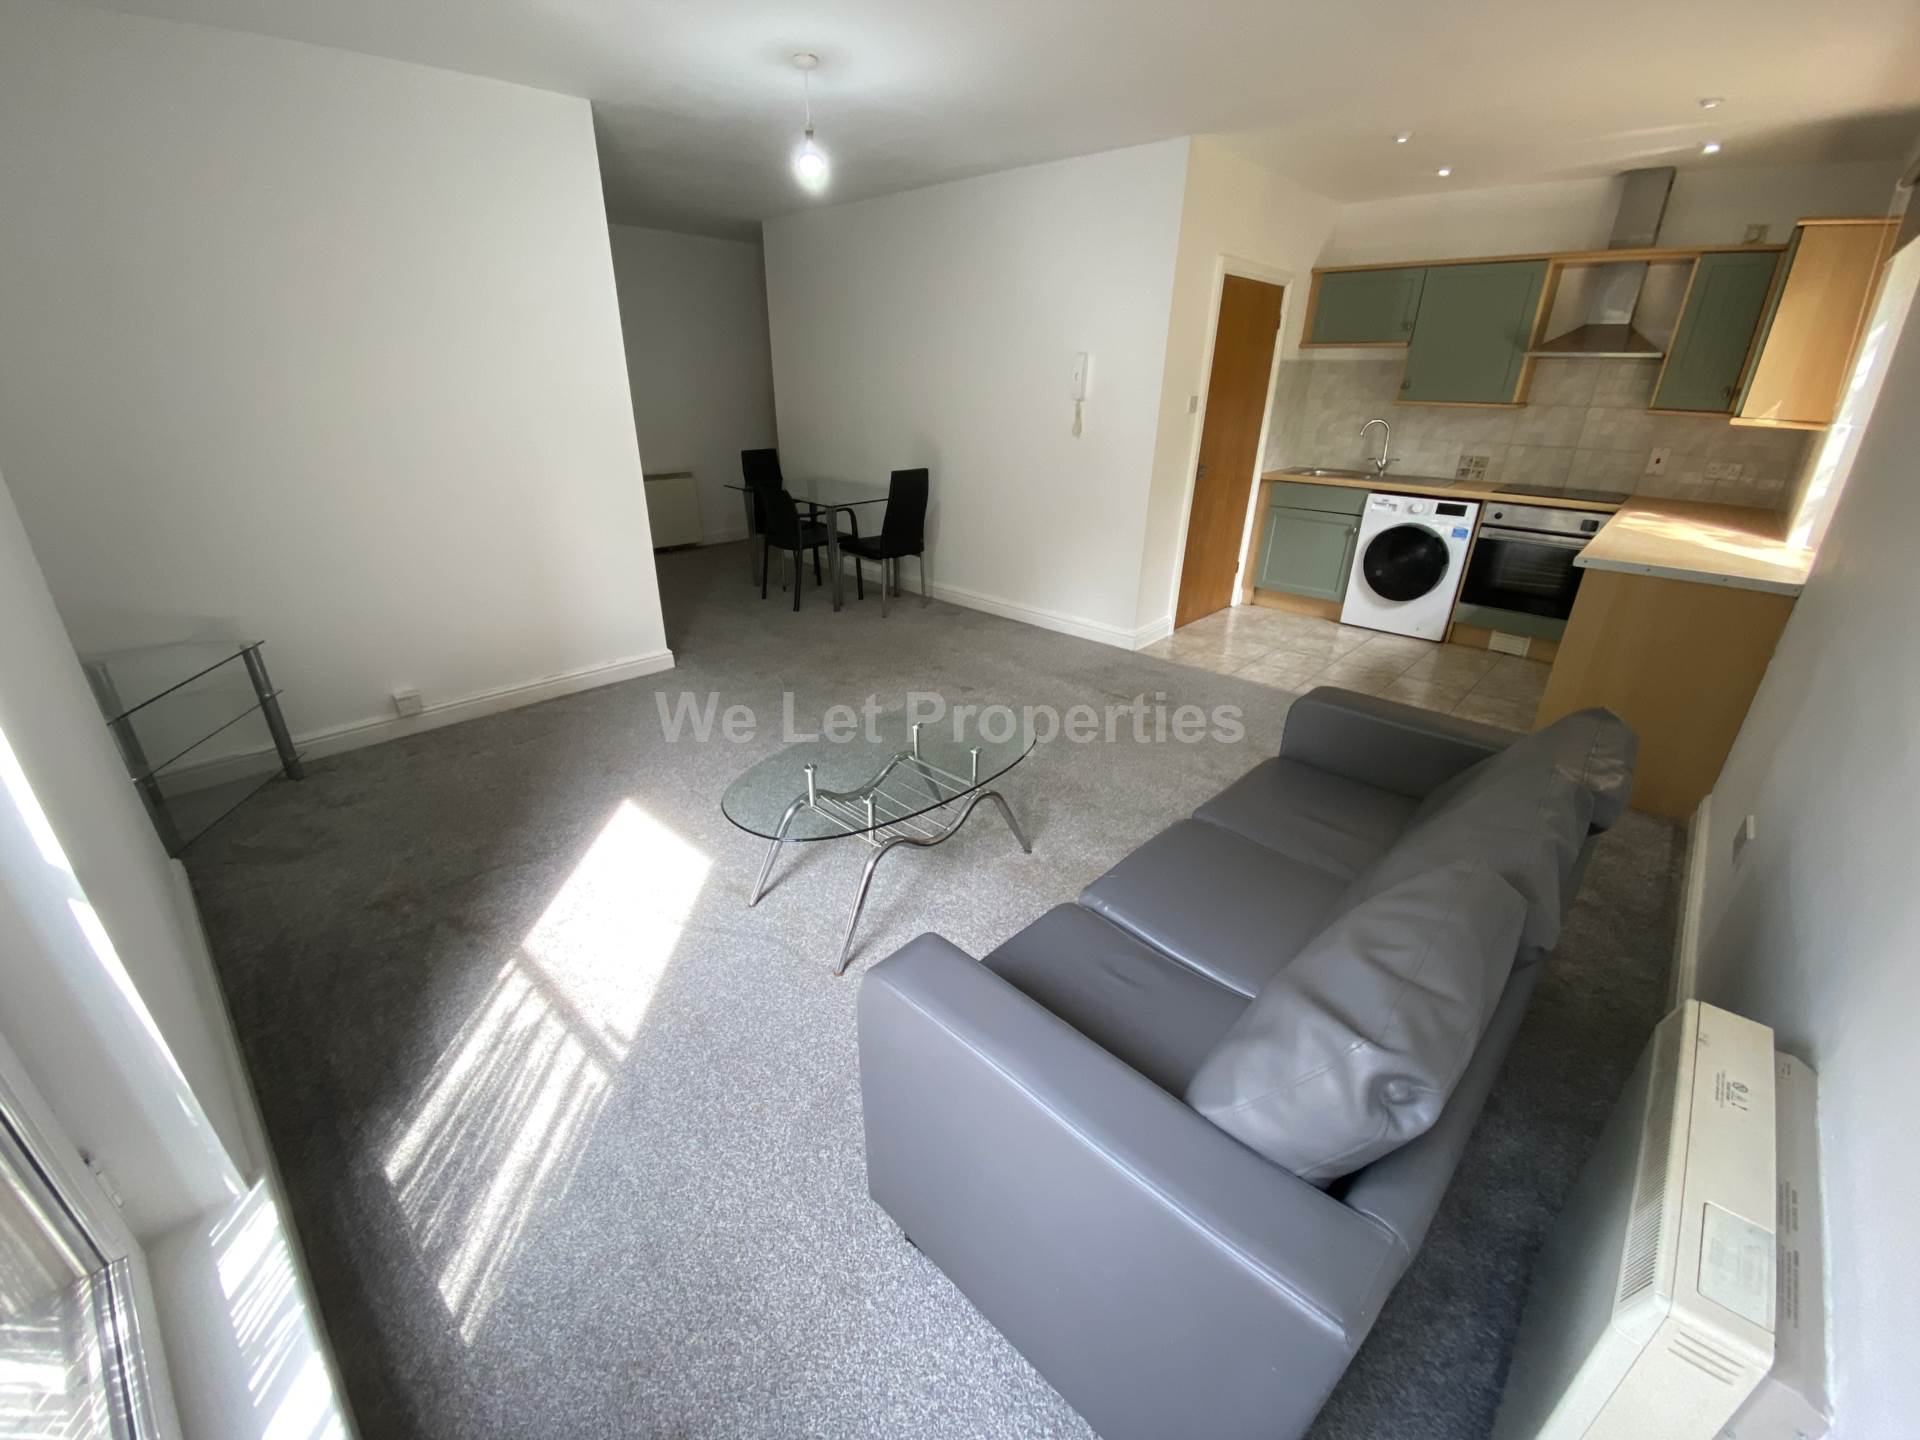 3 bed Apartment for rent in Salford. From We Let Properties - Manchester